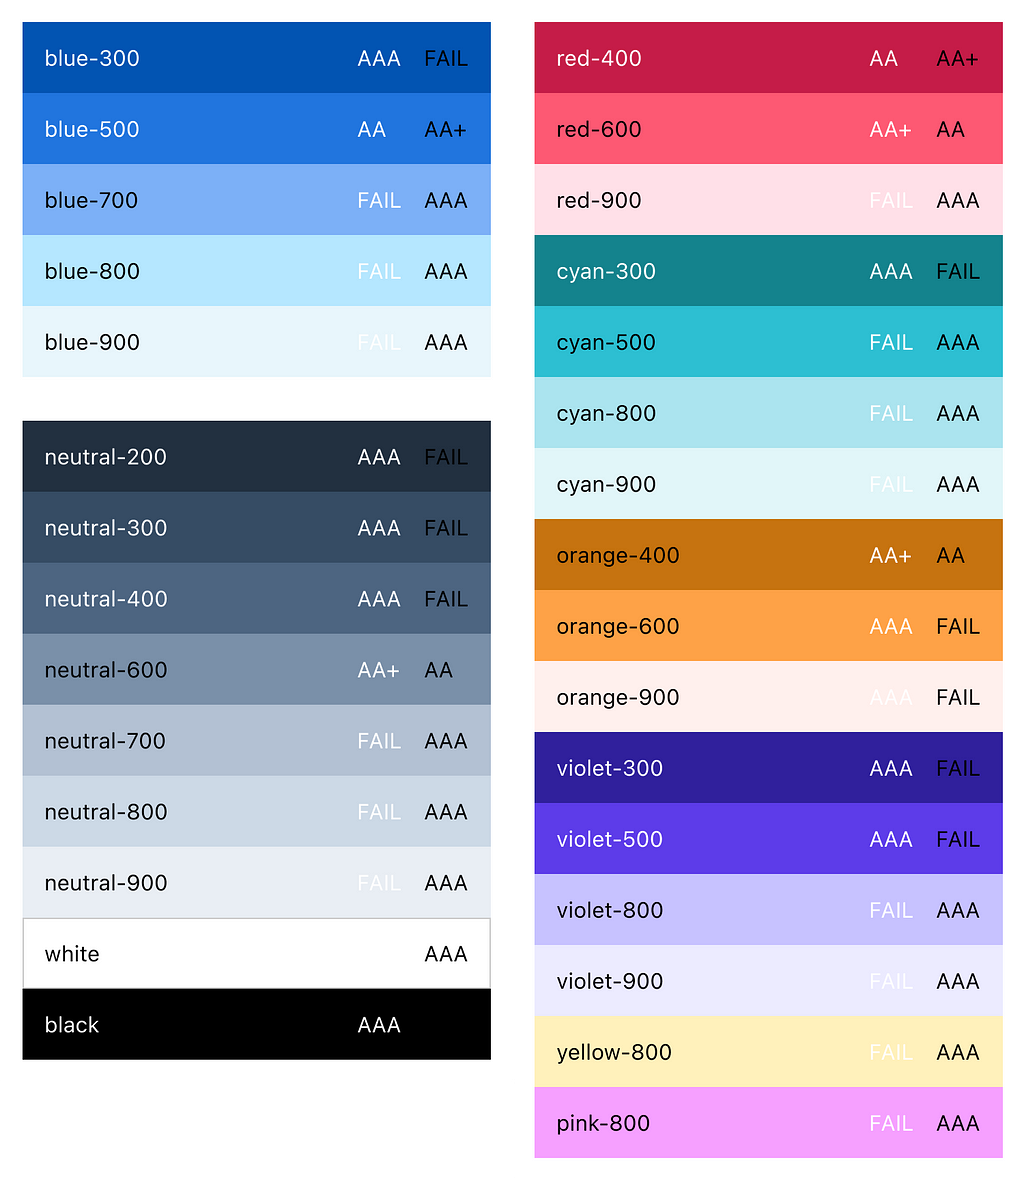 My first pass at a color palette used a pretty basic and hand-tweaked set of colors based on our brand palette